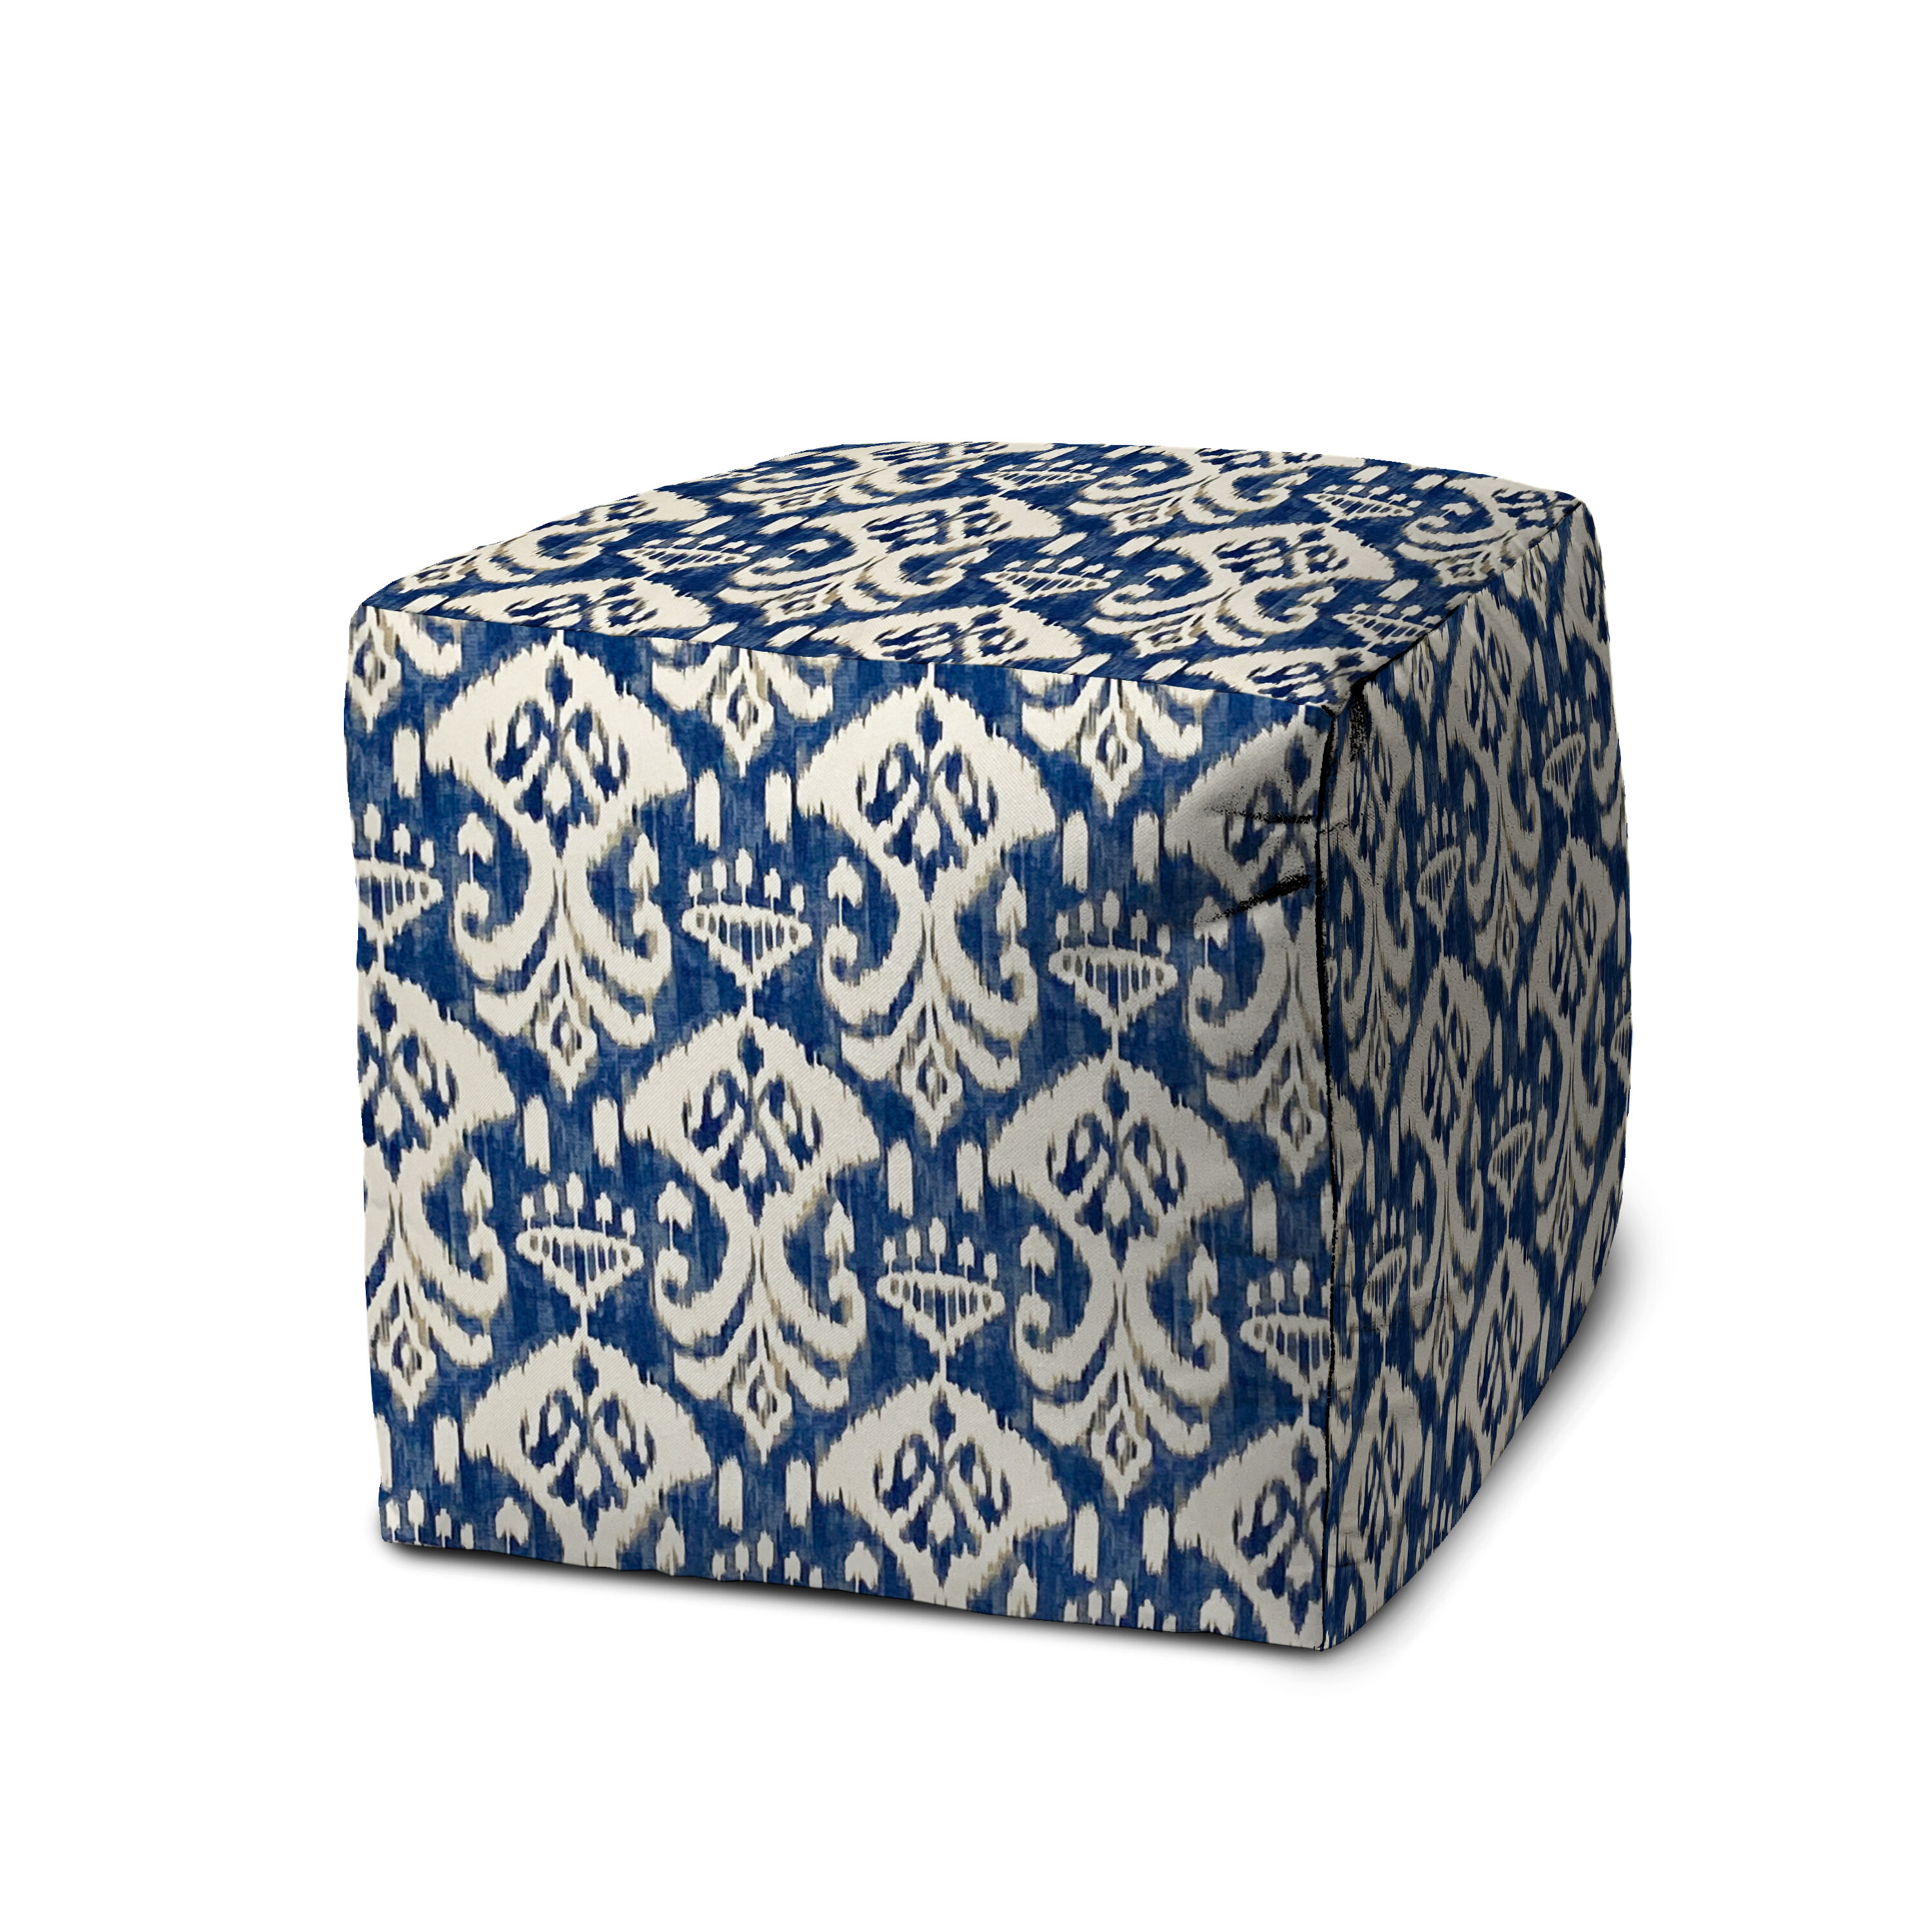 Red Barrel Studio® Brindle Blue Indoor/Outdoor Pouf - Zipper Cover with  Luxury Polyfil Stuffing - 17 x 17 x 17 Cube